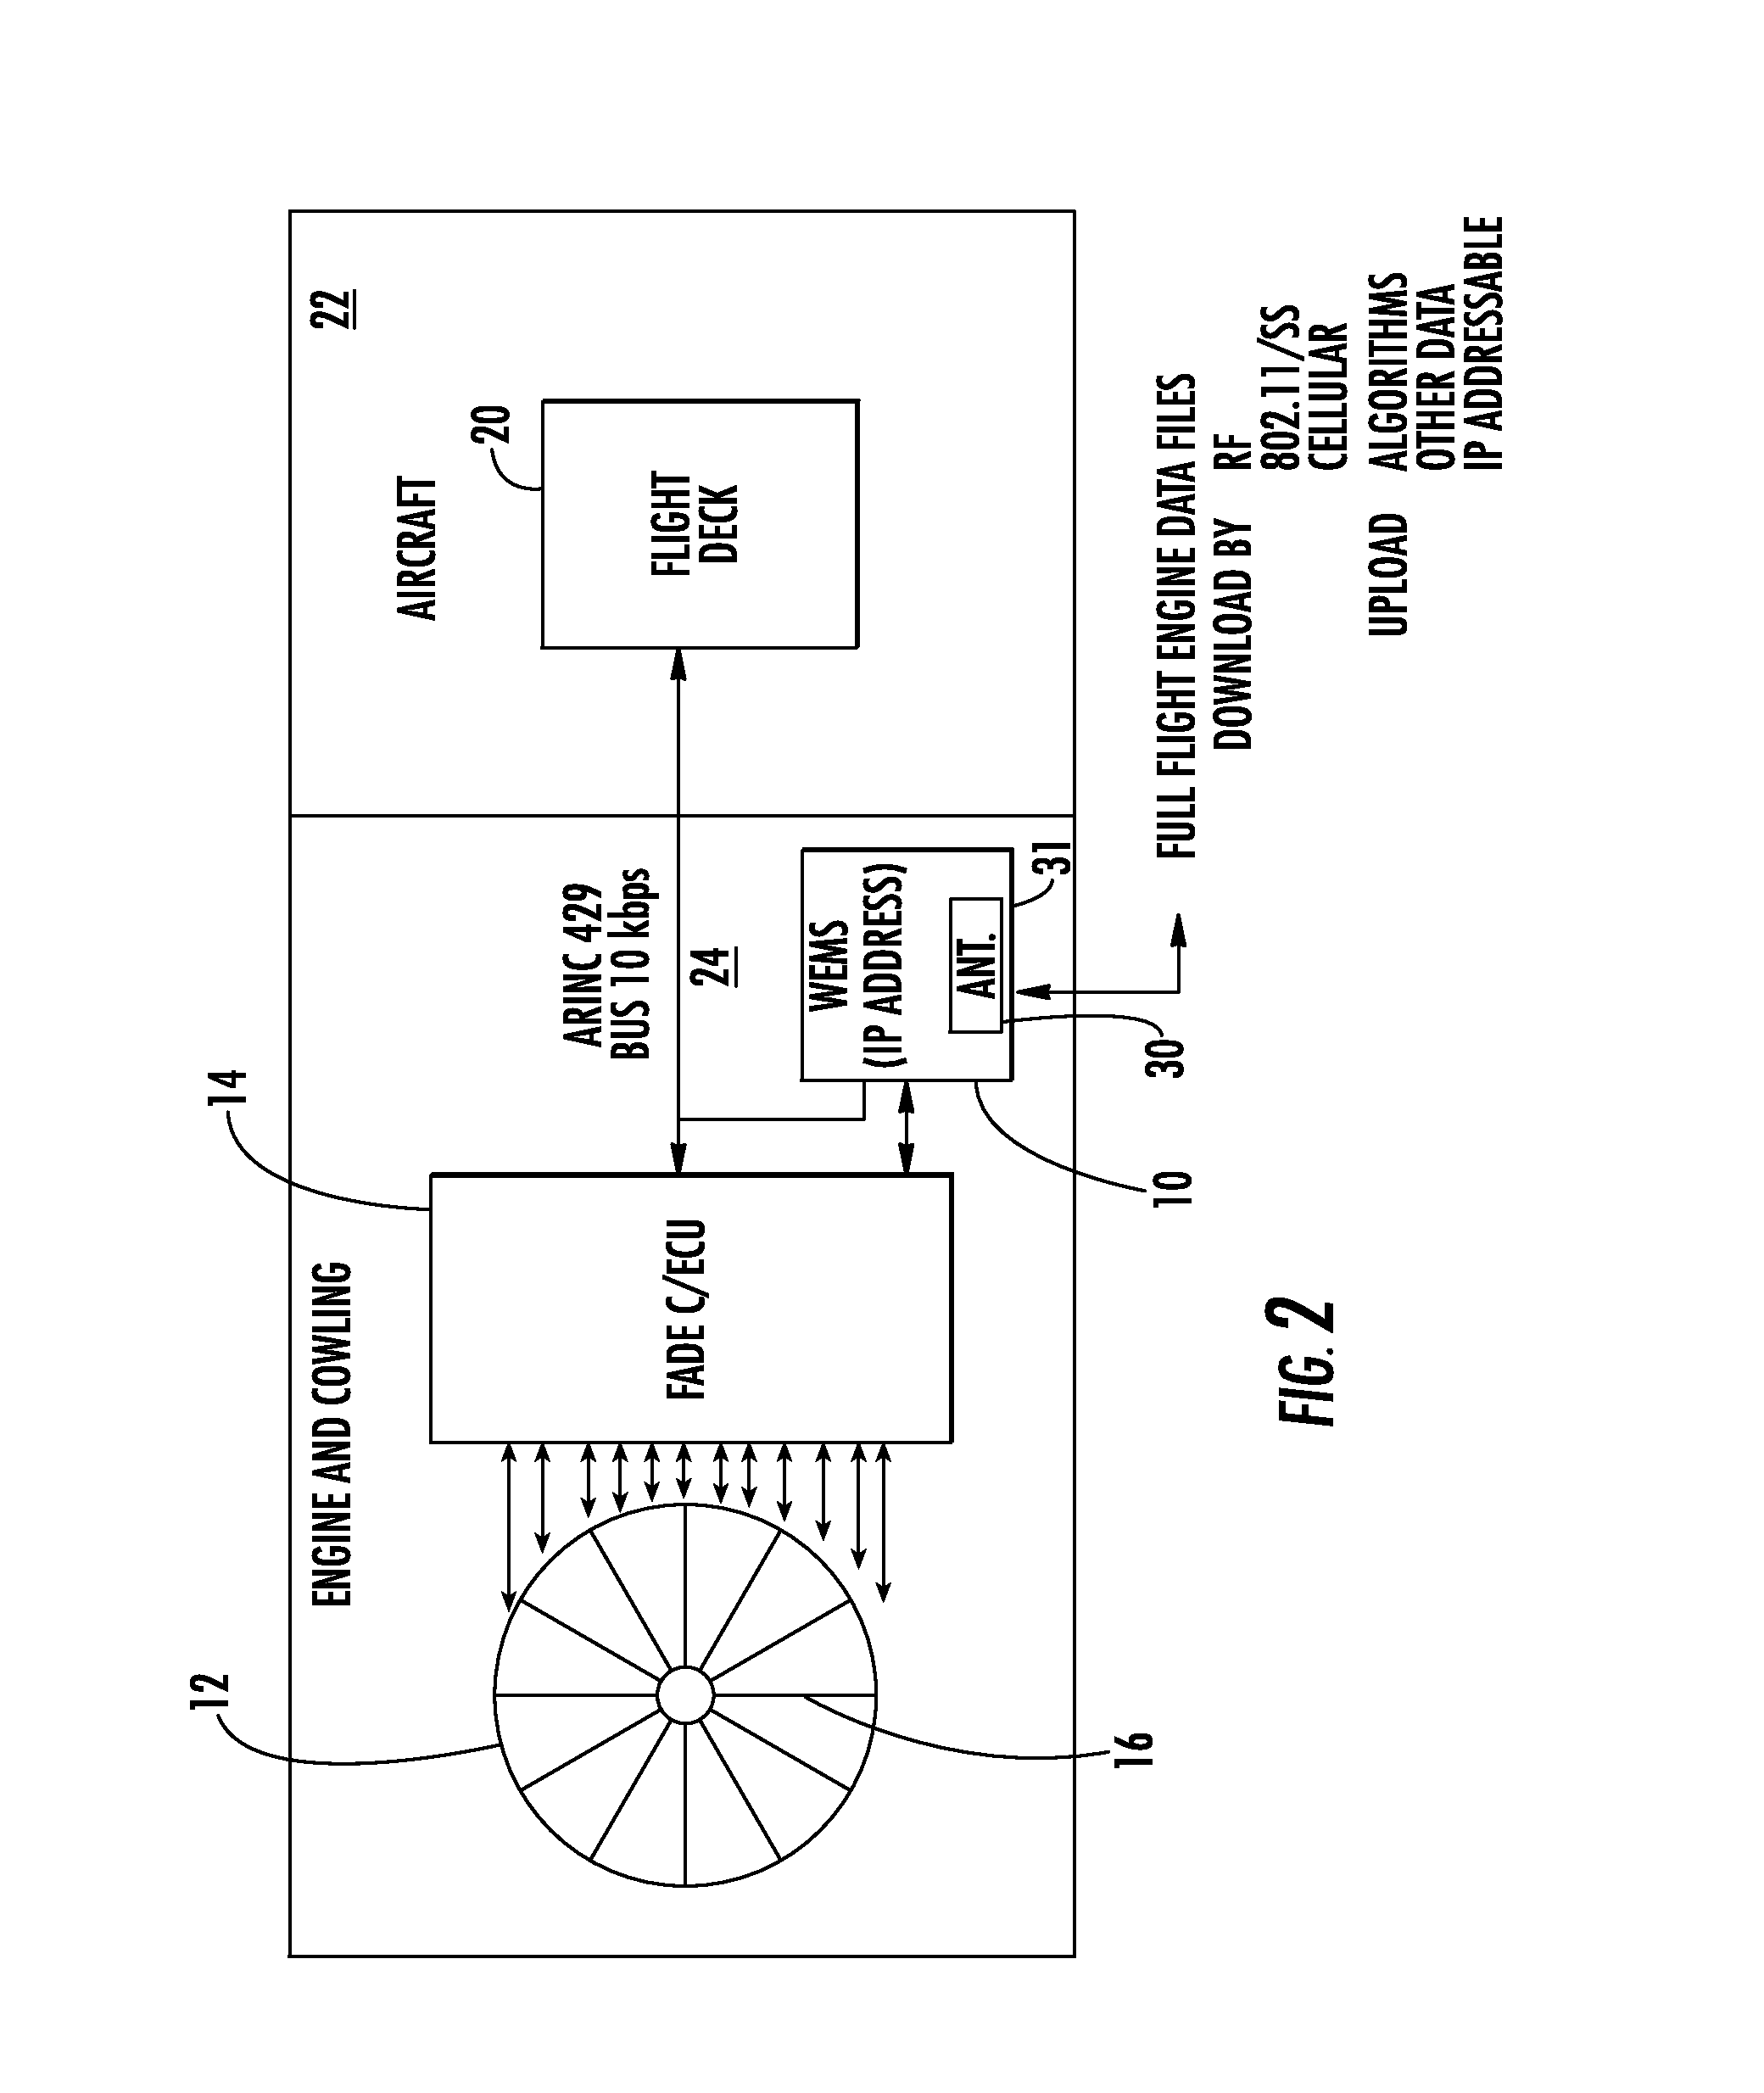 Wireless engine monitoring system and associated engine wireless sensor network